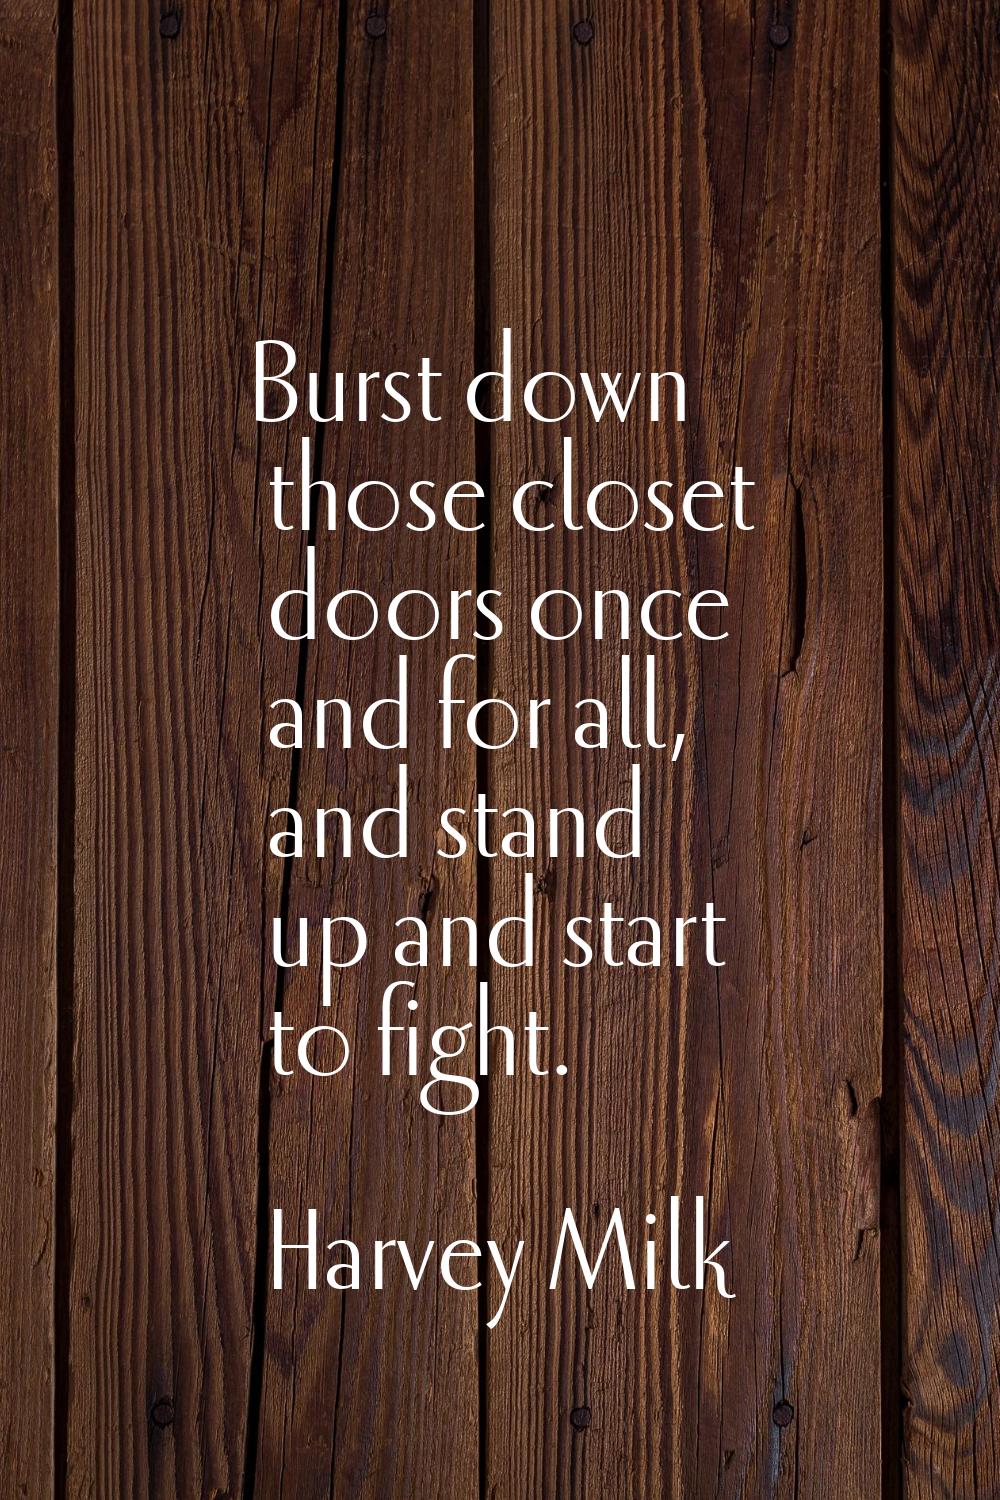 Burst down those closet doors once and for all, and stand up and start to fight.